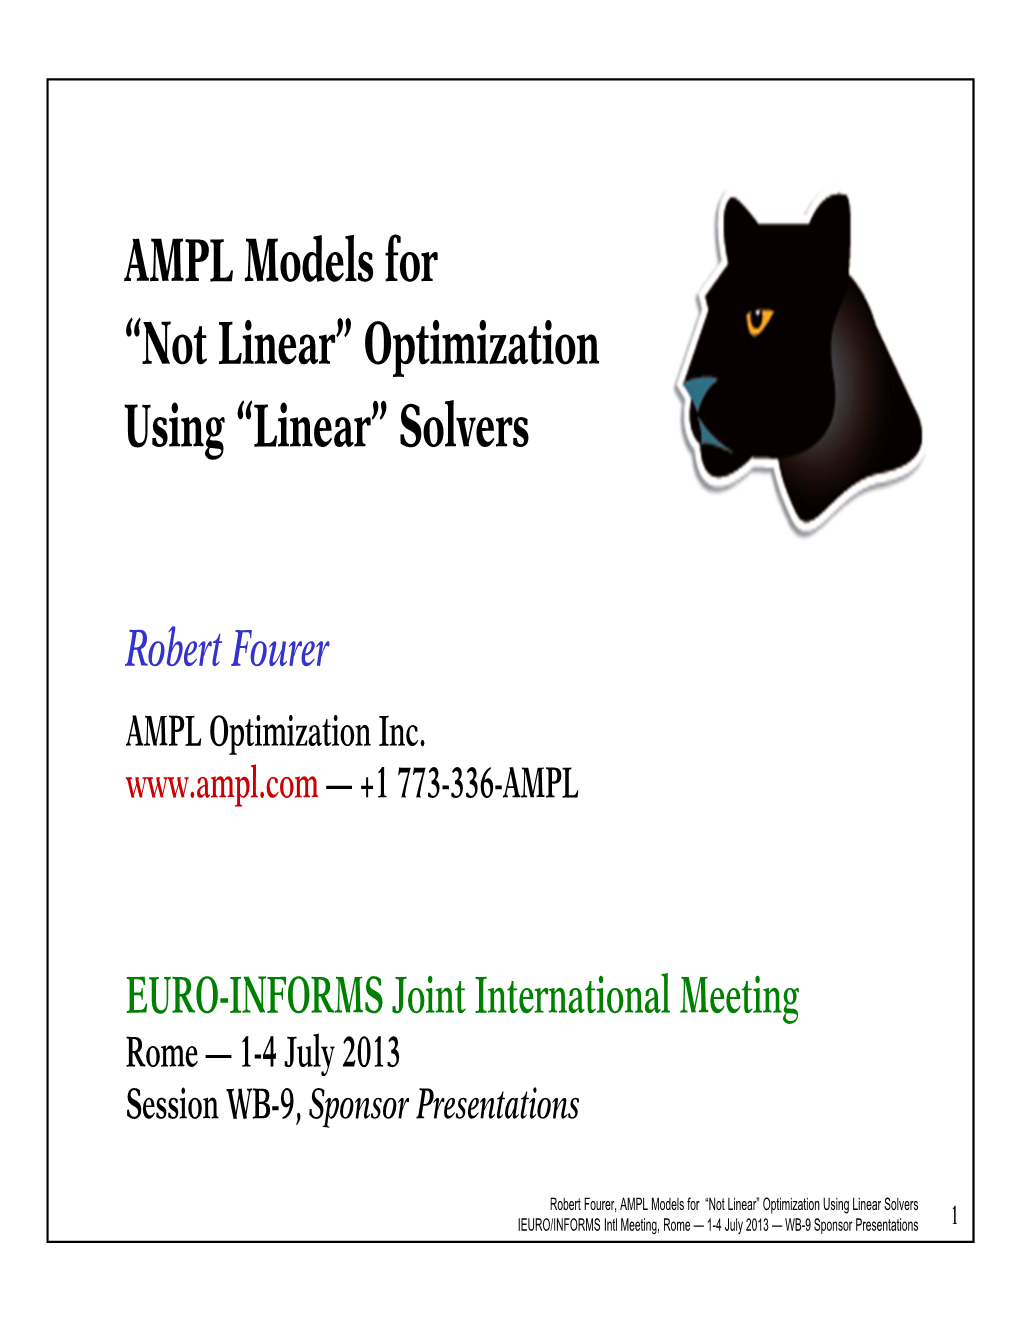 AMPL Models for “Not Linear” Optimization Using “Linear” Solvers